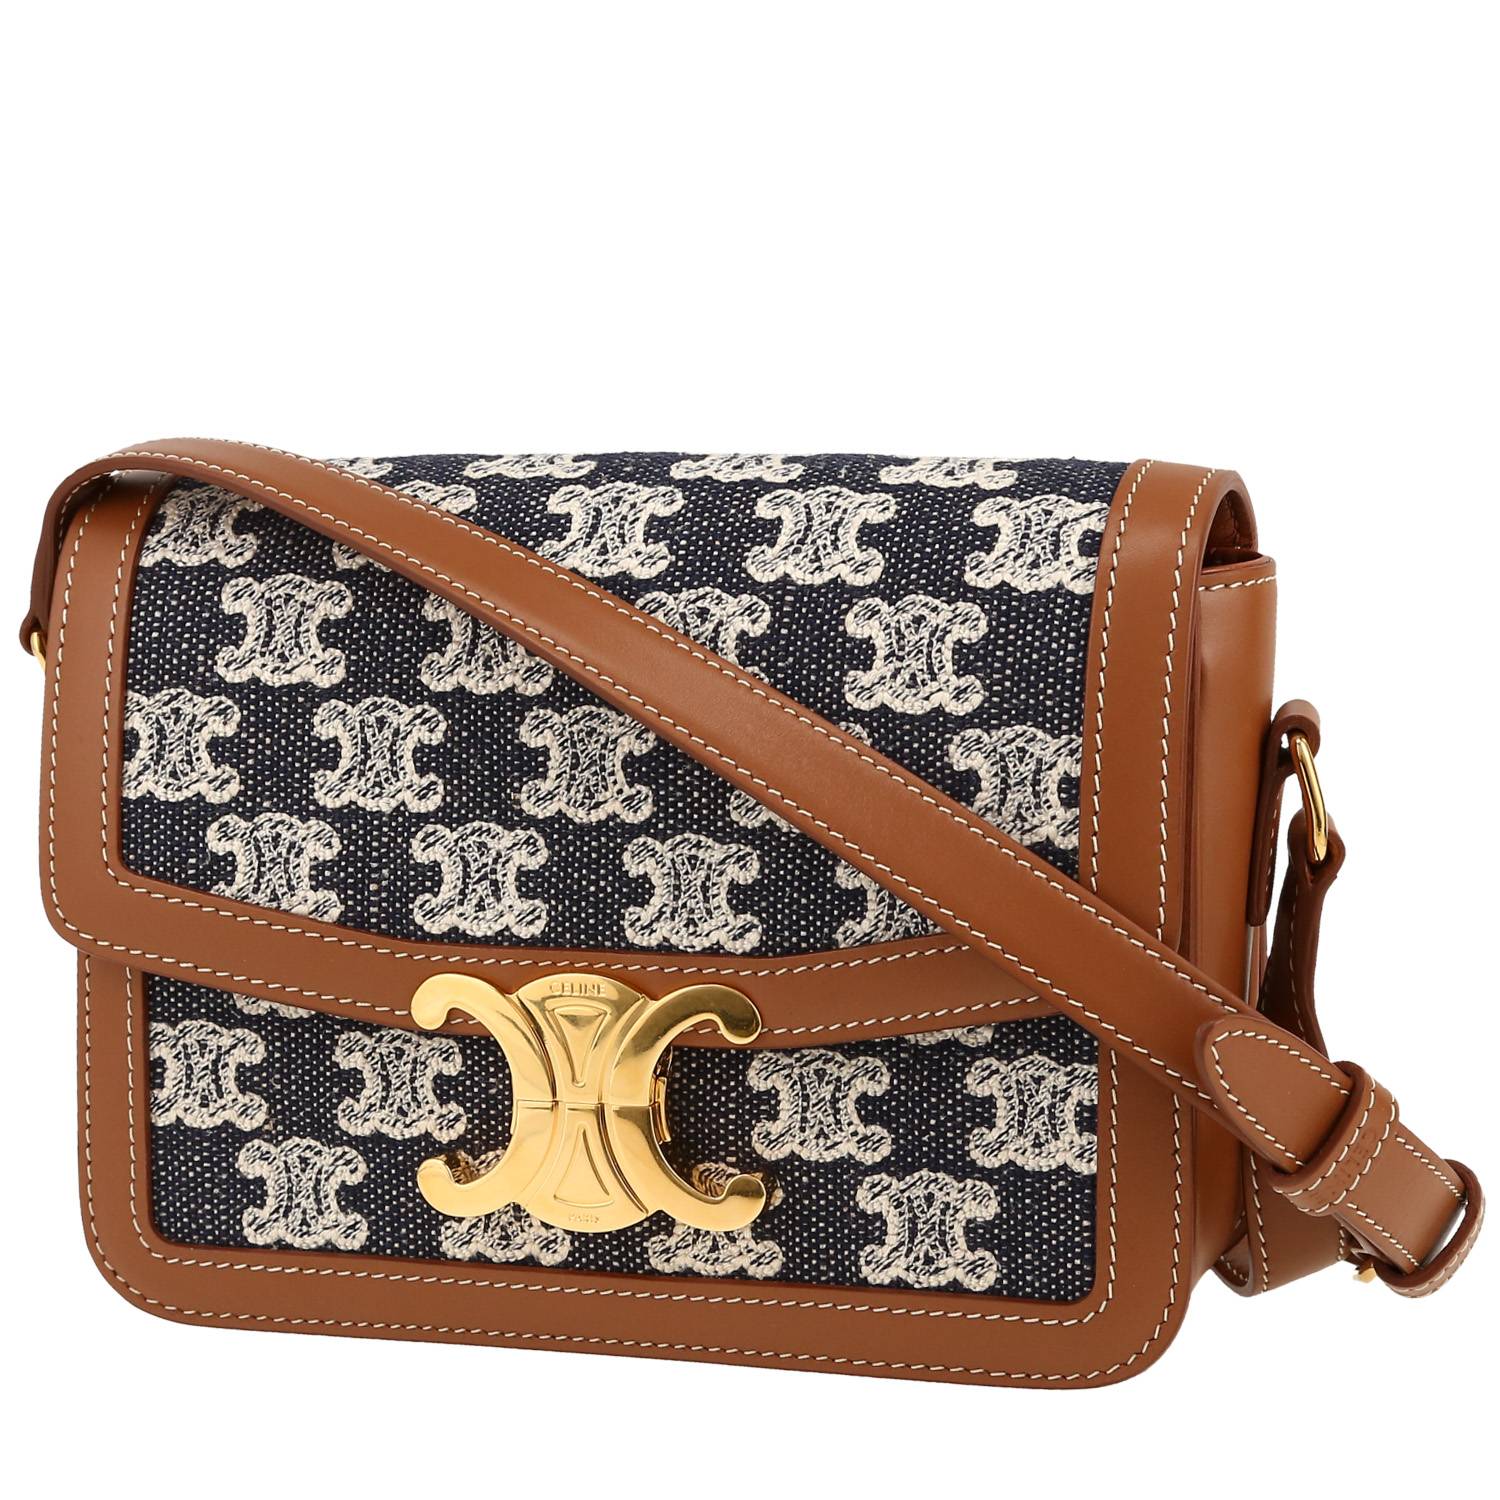 Triomphe Teen Shoulder Bag In Navy Blue "Triomphe" Canvas